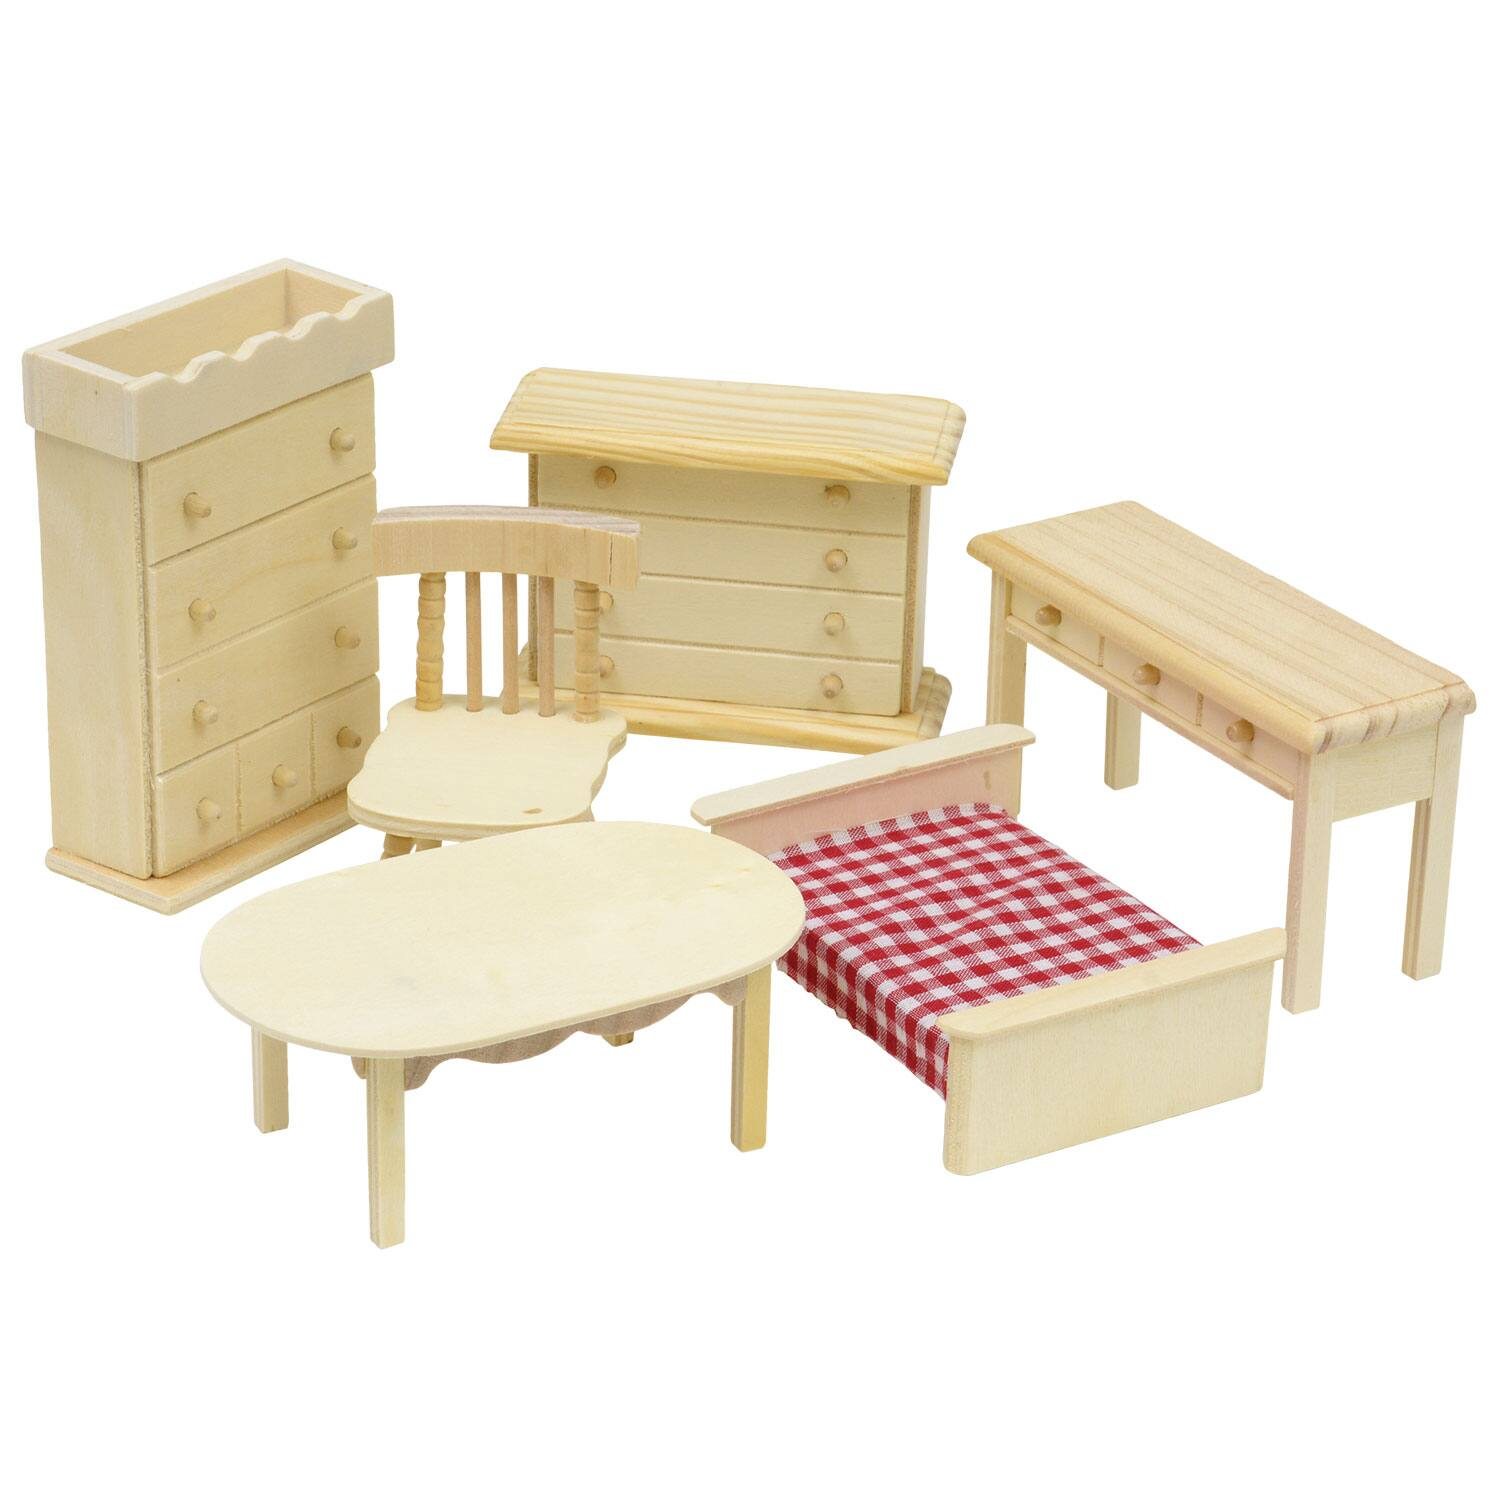 Doll House Wooden Furniture